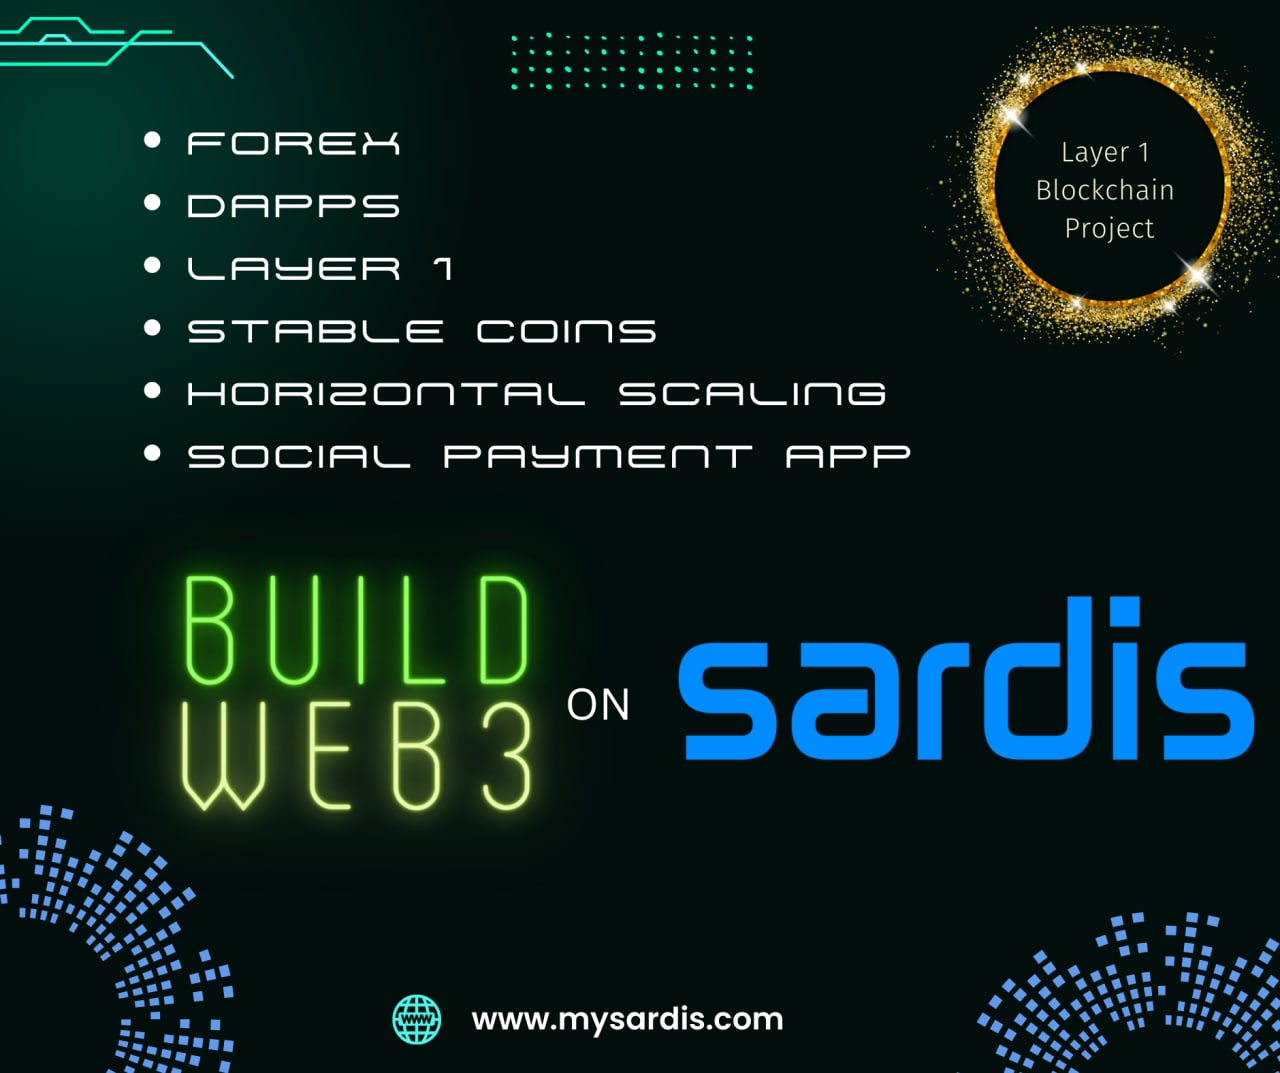 Layer 1 Project "SARDIS" Launches the First Crypto-Based Forex System - AccessWire